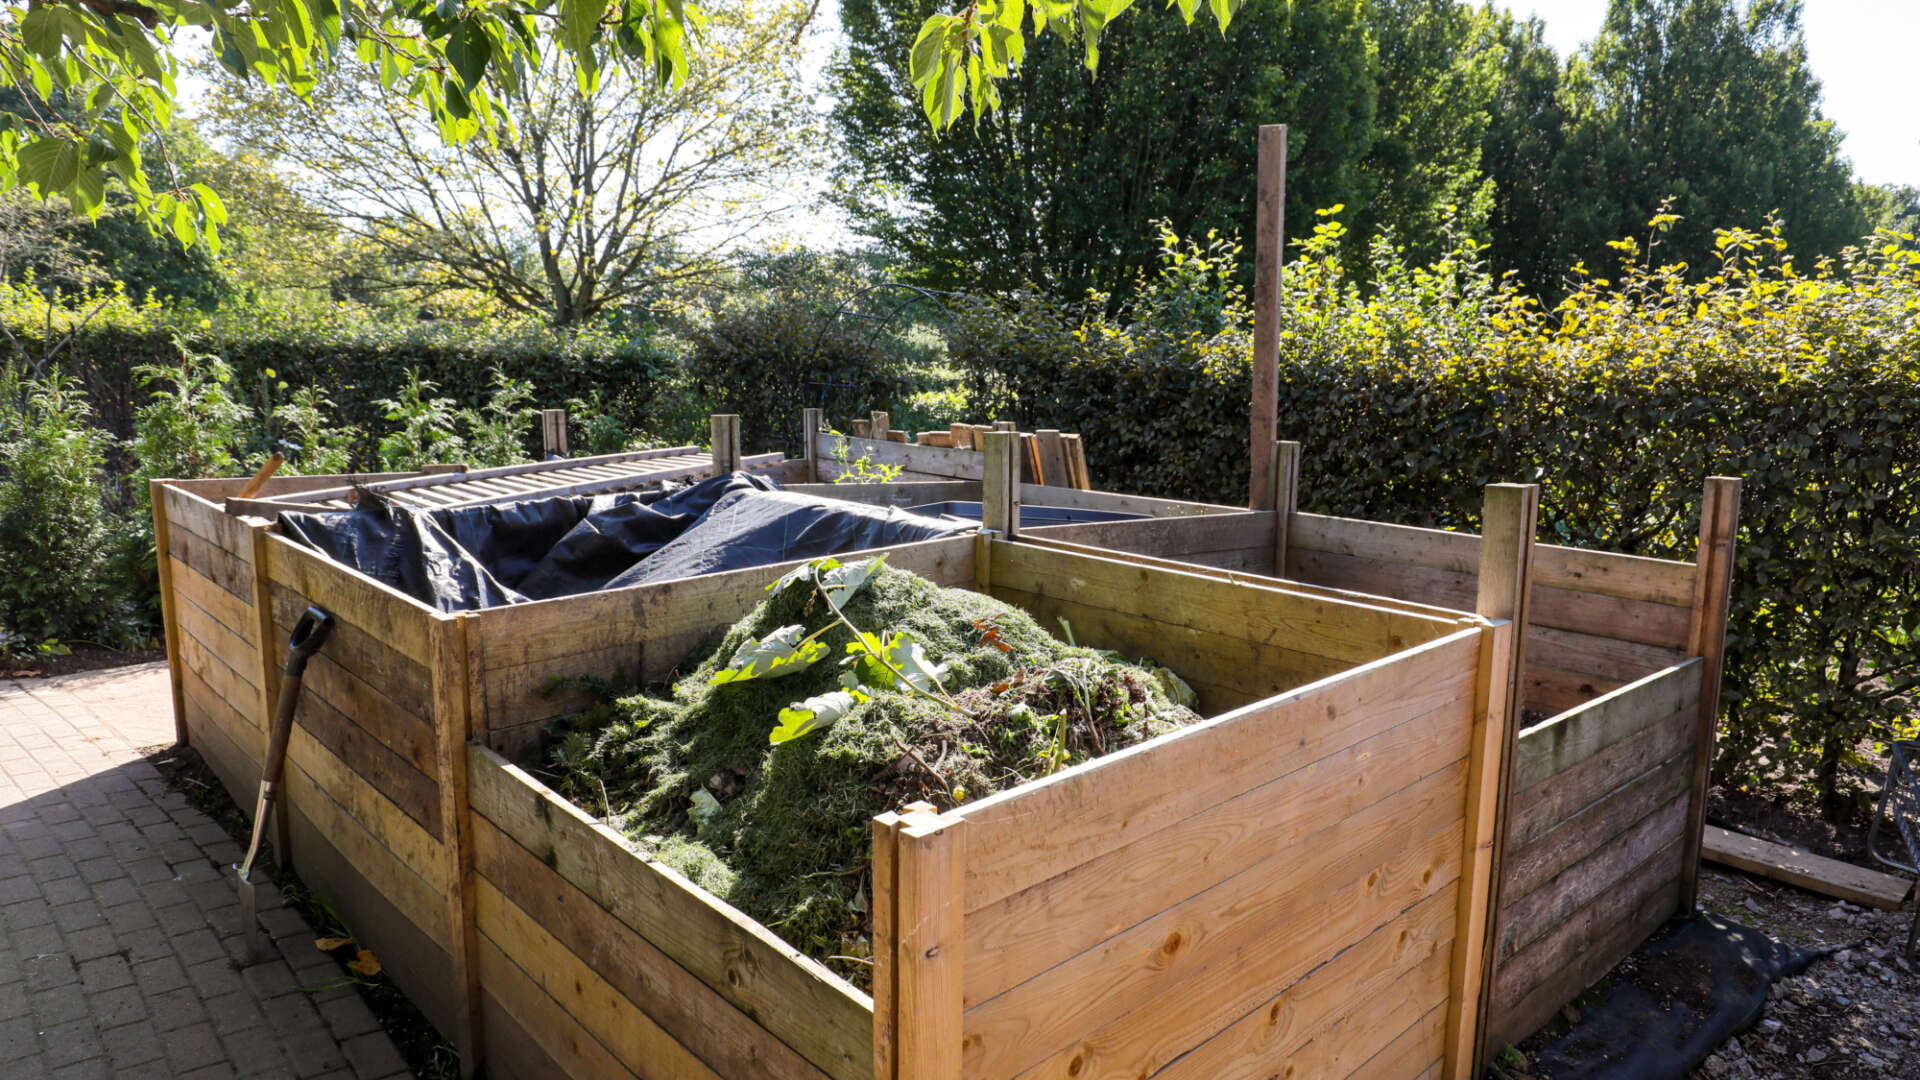 Full and covered compost bins